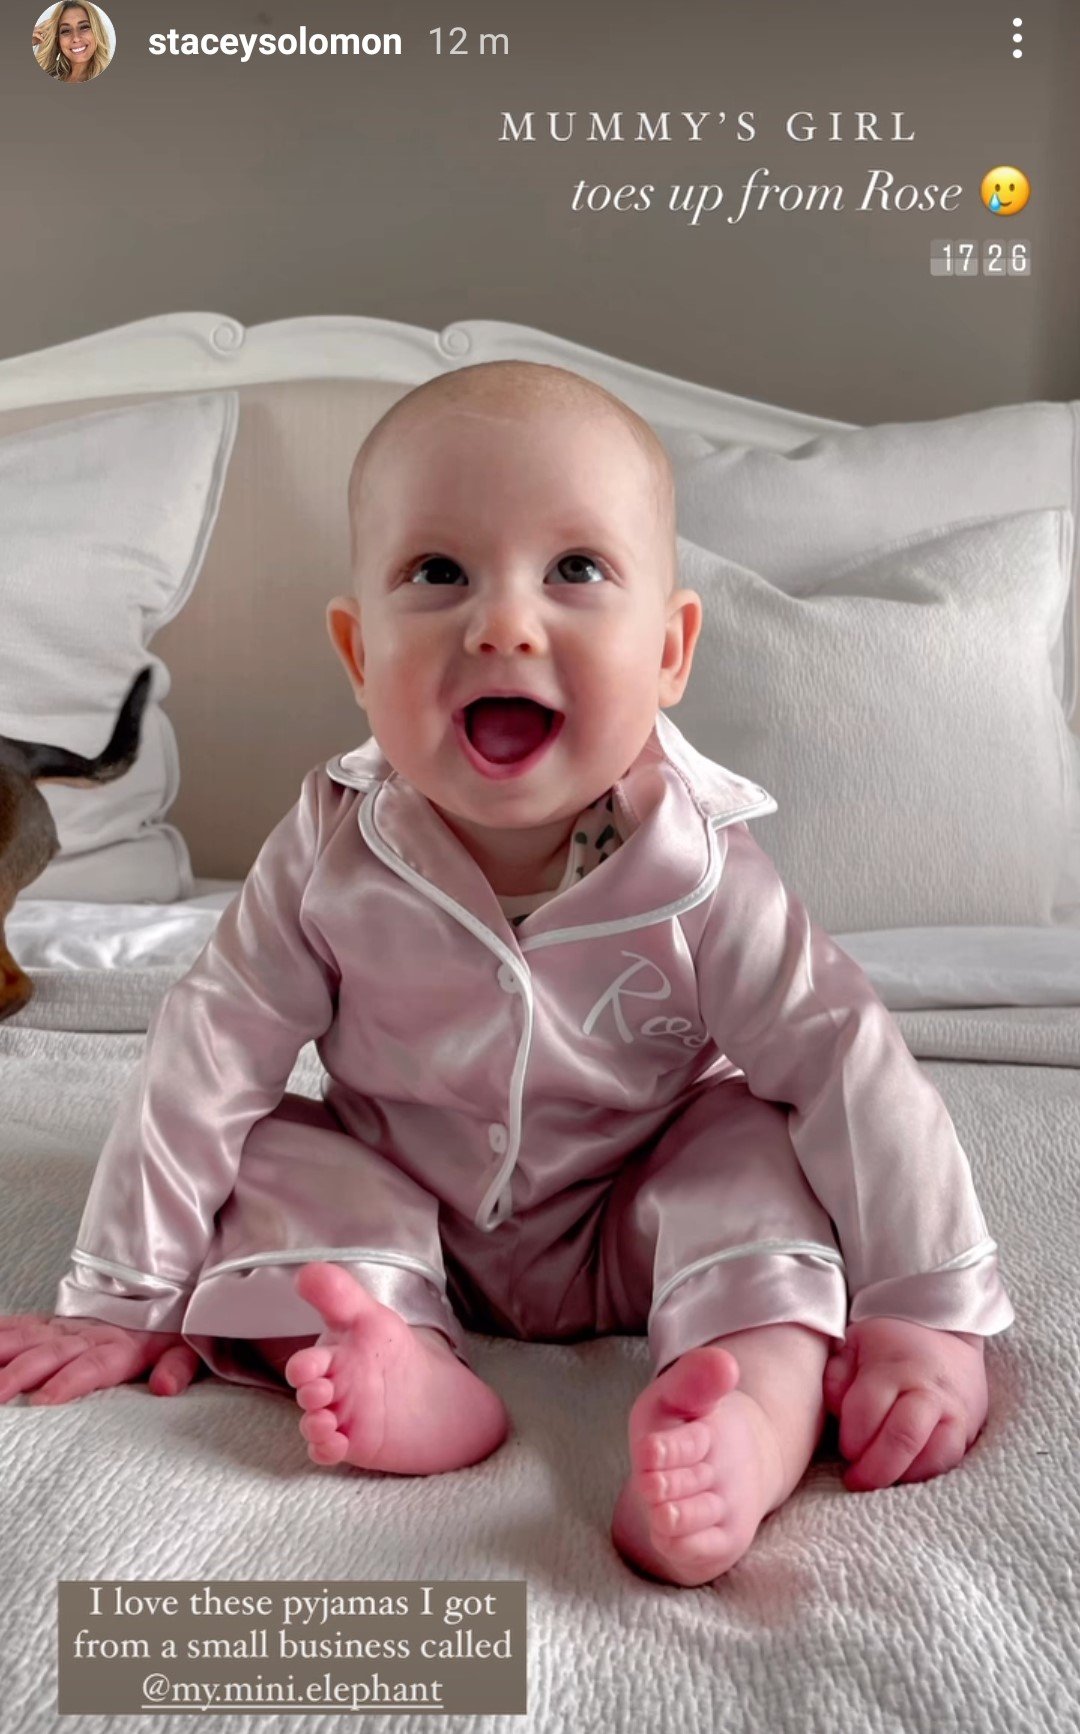 Dusty Light Pink Satin Pyjamas (As worn by Stacey Solomon's baby Rose)